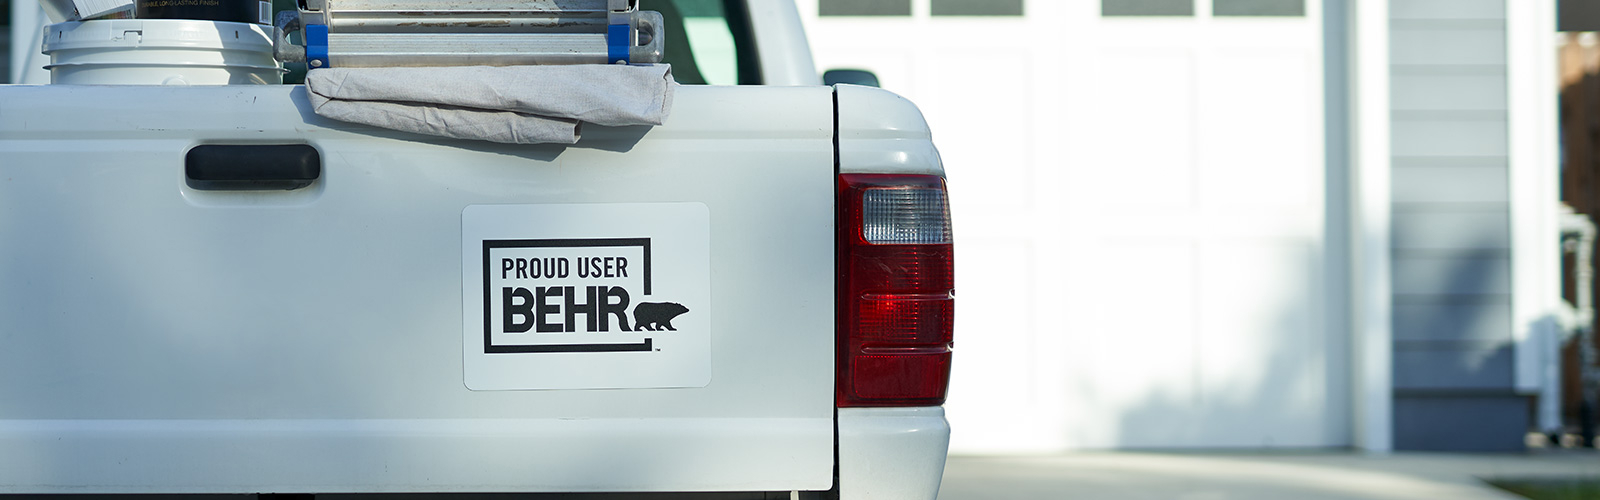 landscape image of a back of a truck with a PROUD USER BEHR magnet sign